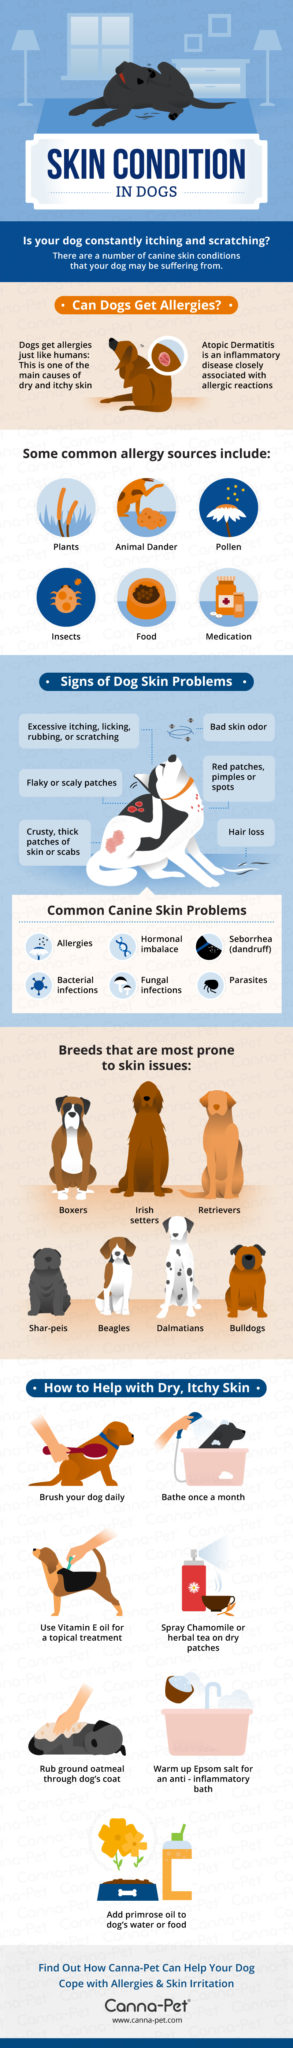 skin condition in dogs